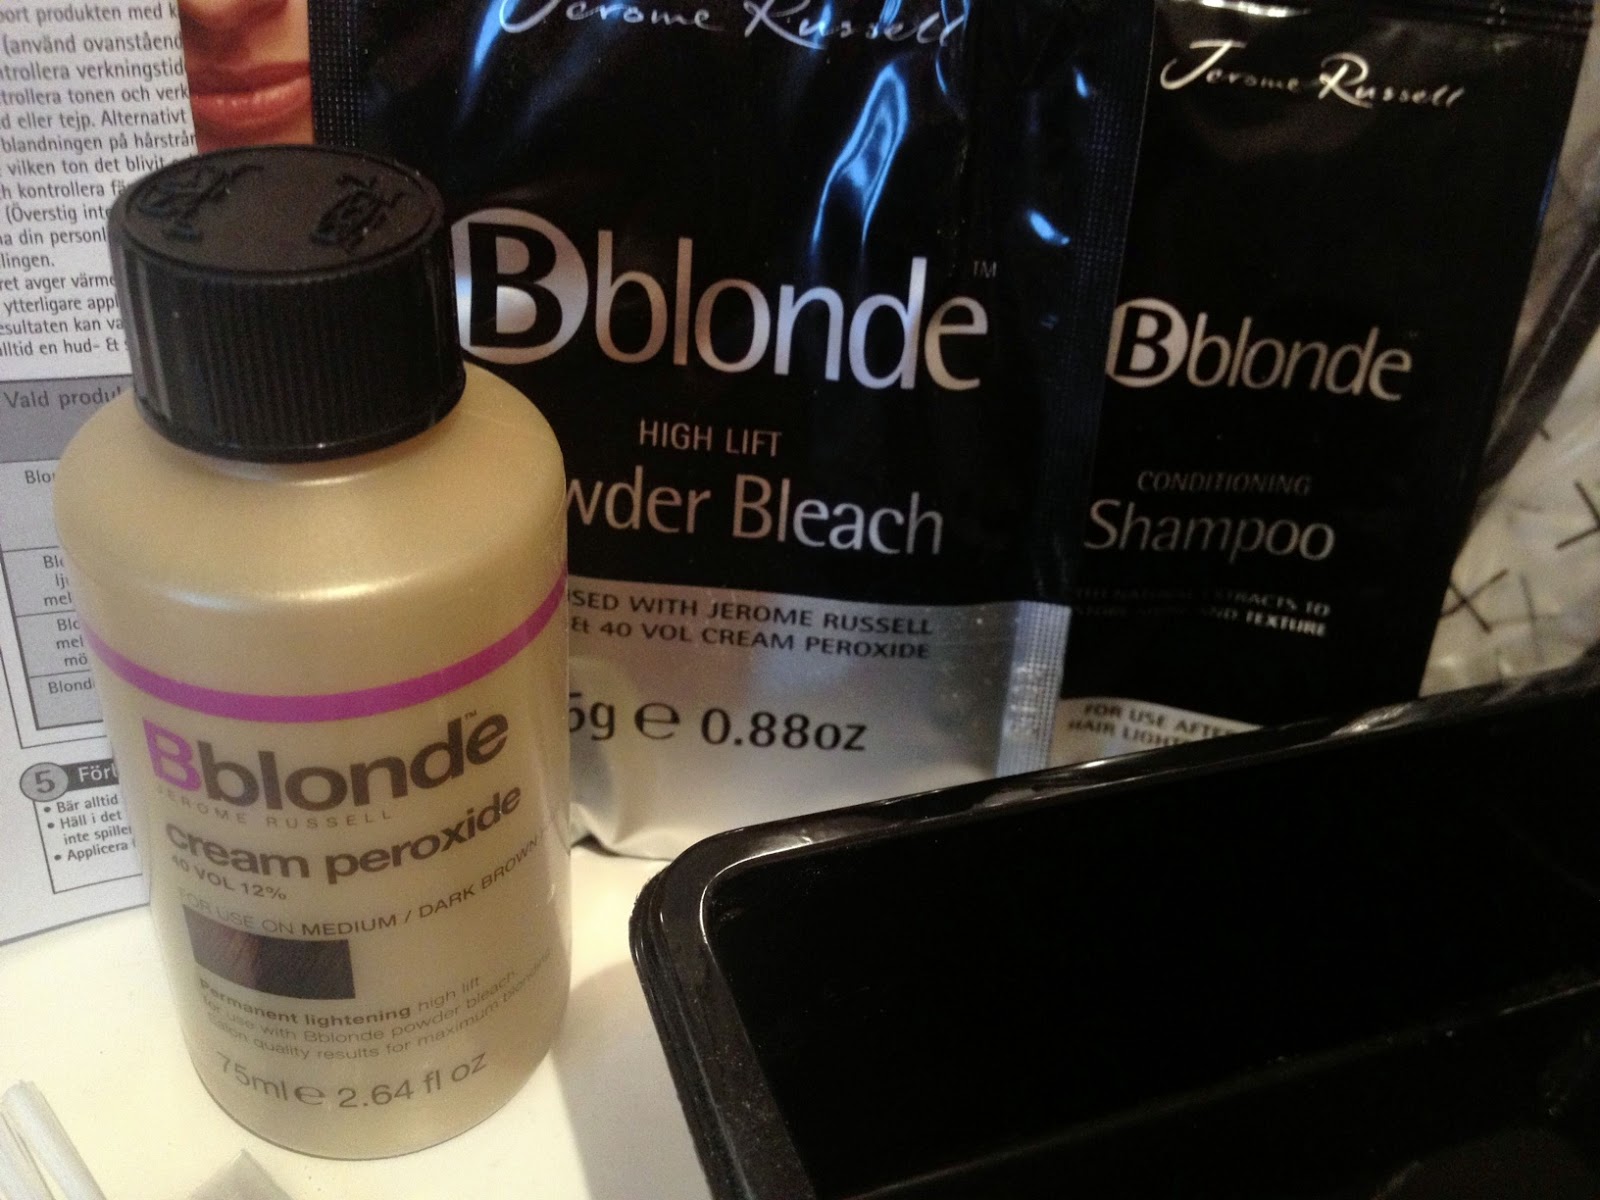 9. Jerome Russell Bblonde Maximum Highlighting Kit - wide 7